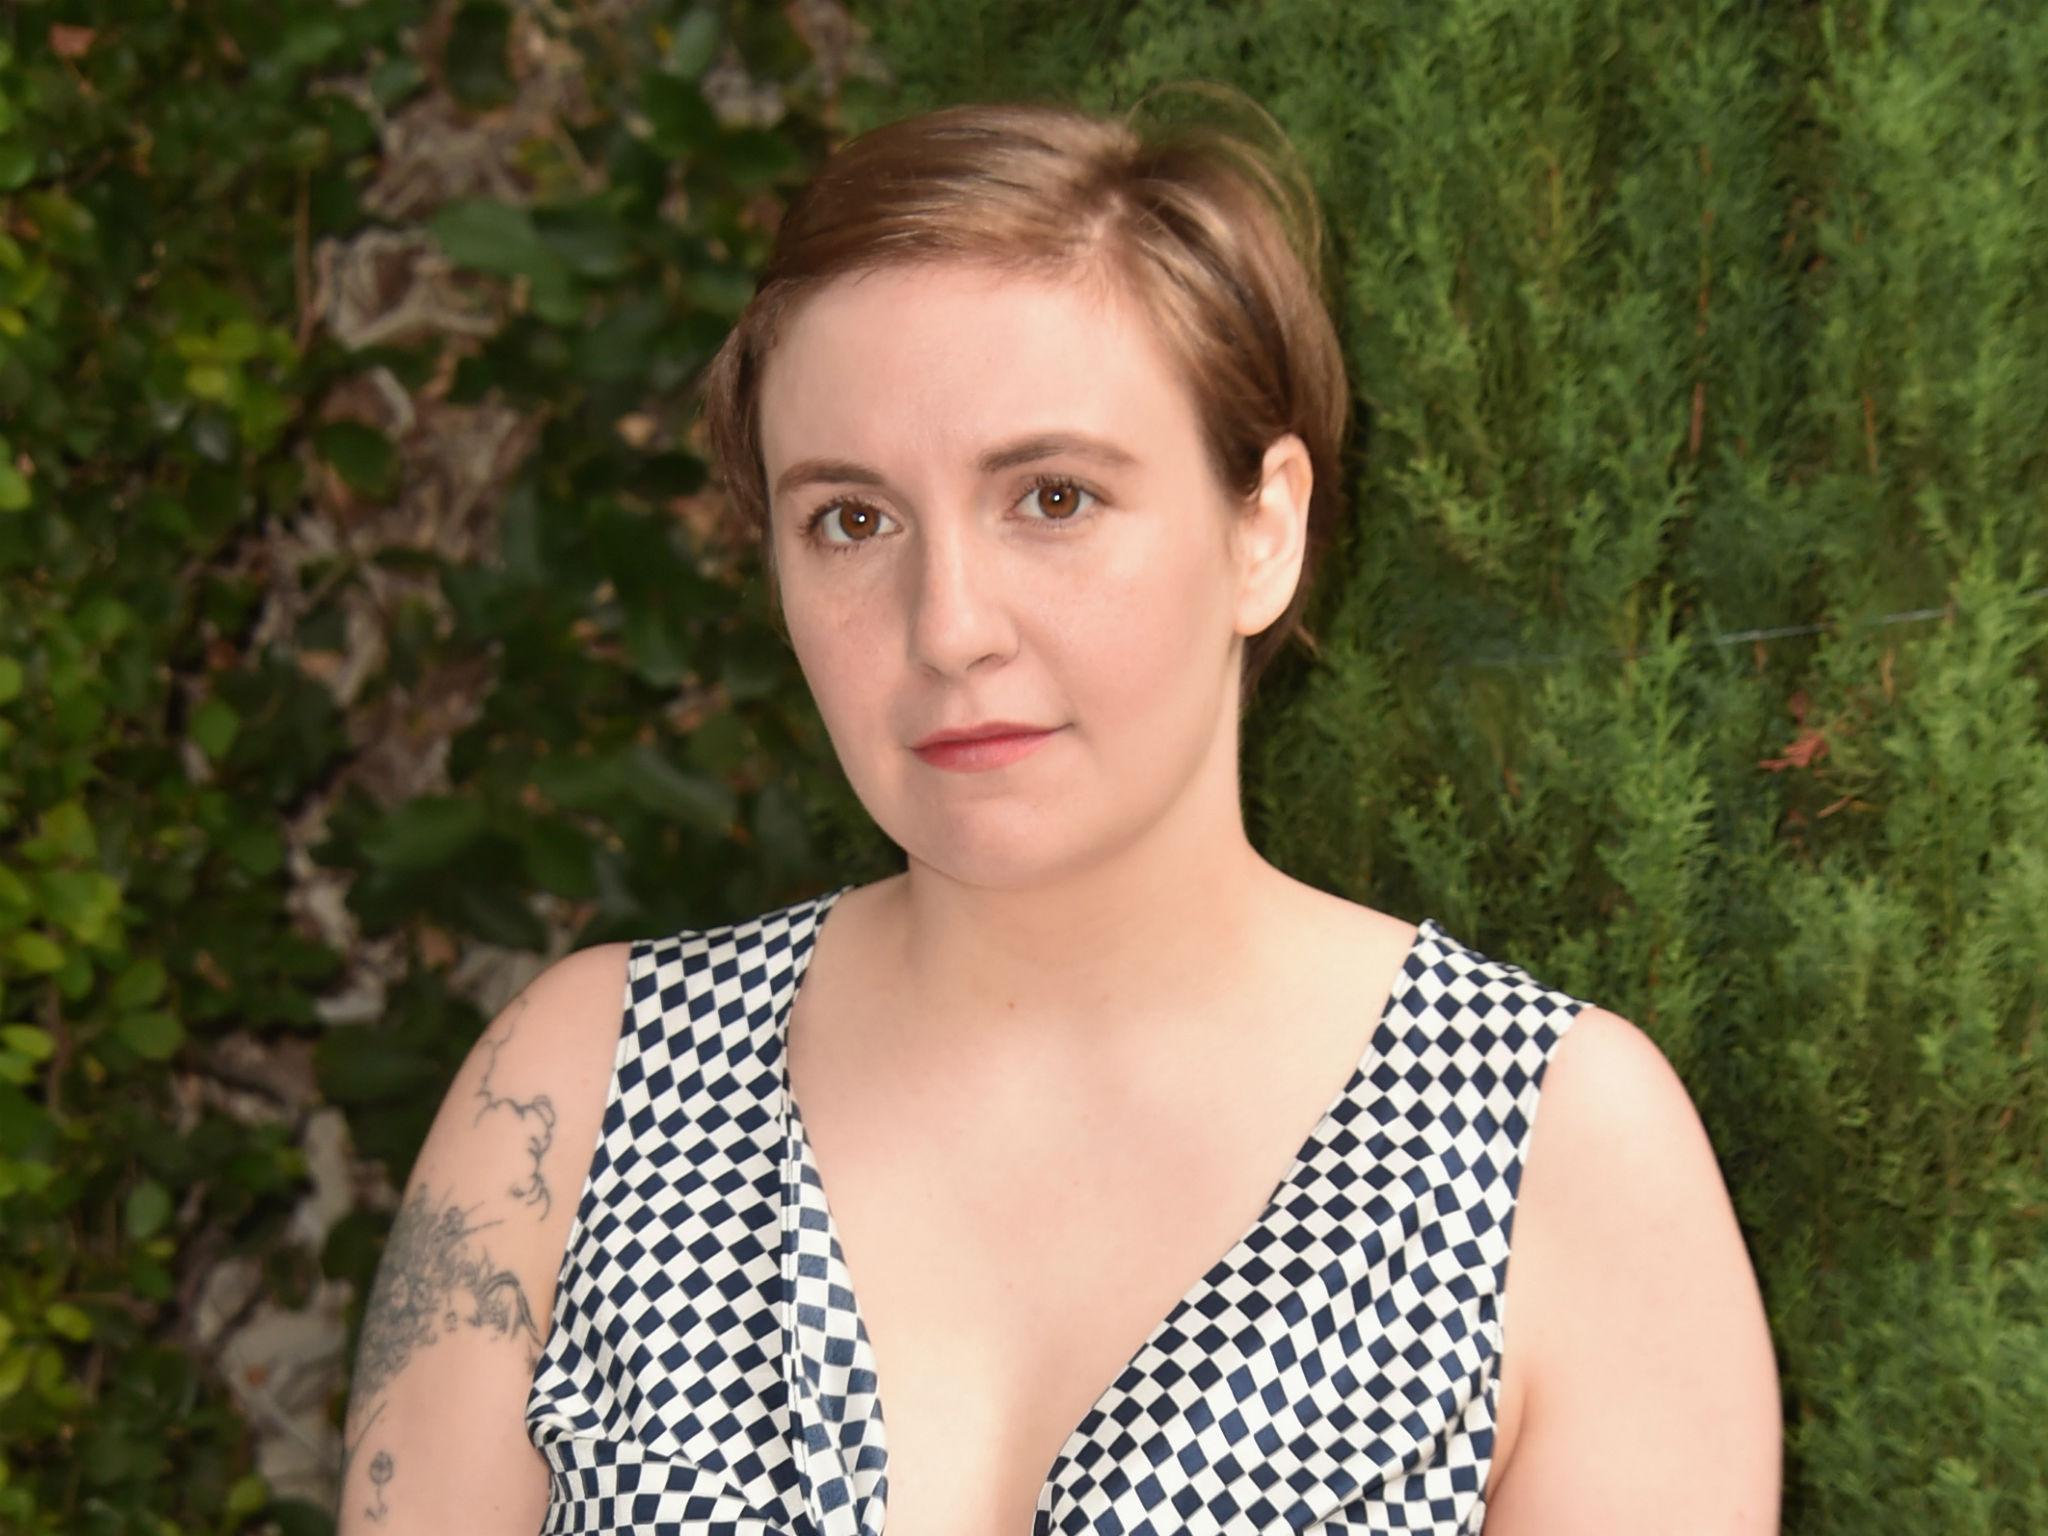 Stanford rape case Lena Dunham and the cast of Girls dedicate video message to survivor The Independent The Independent picture